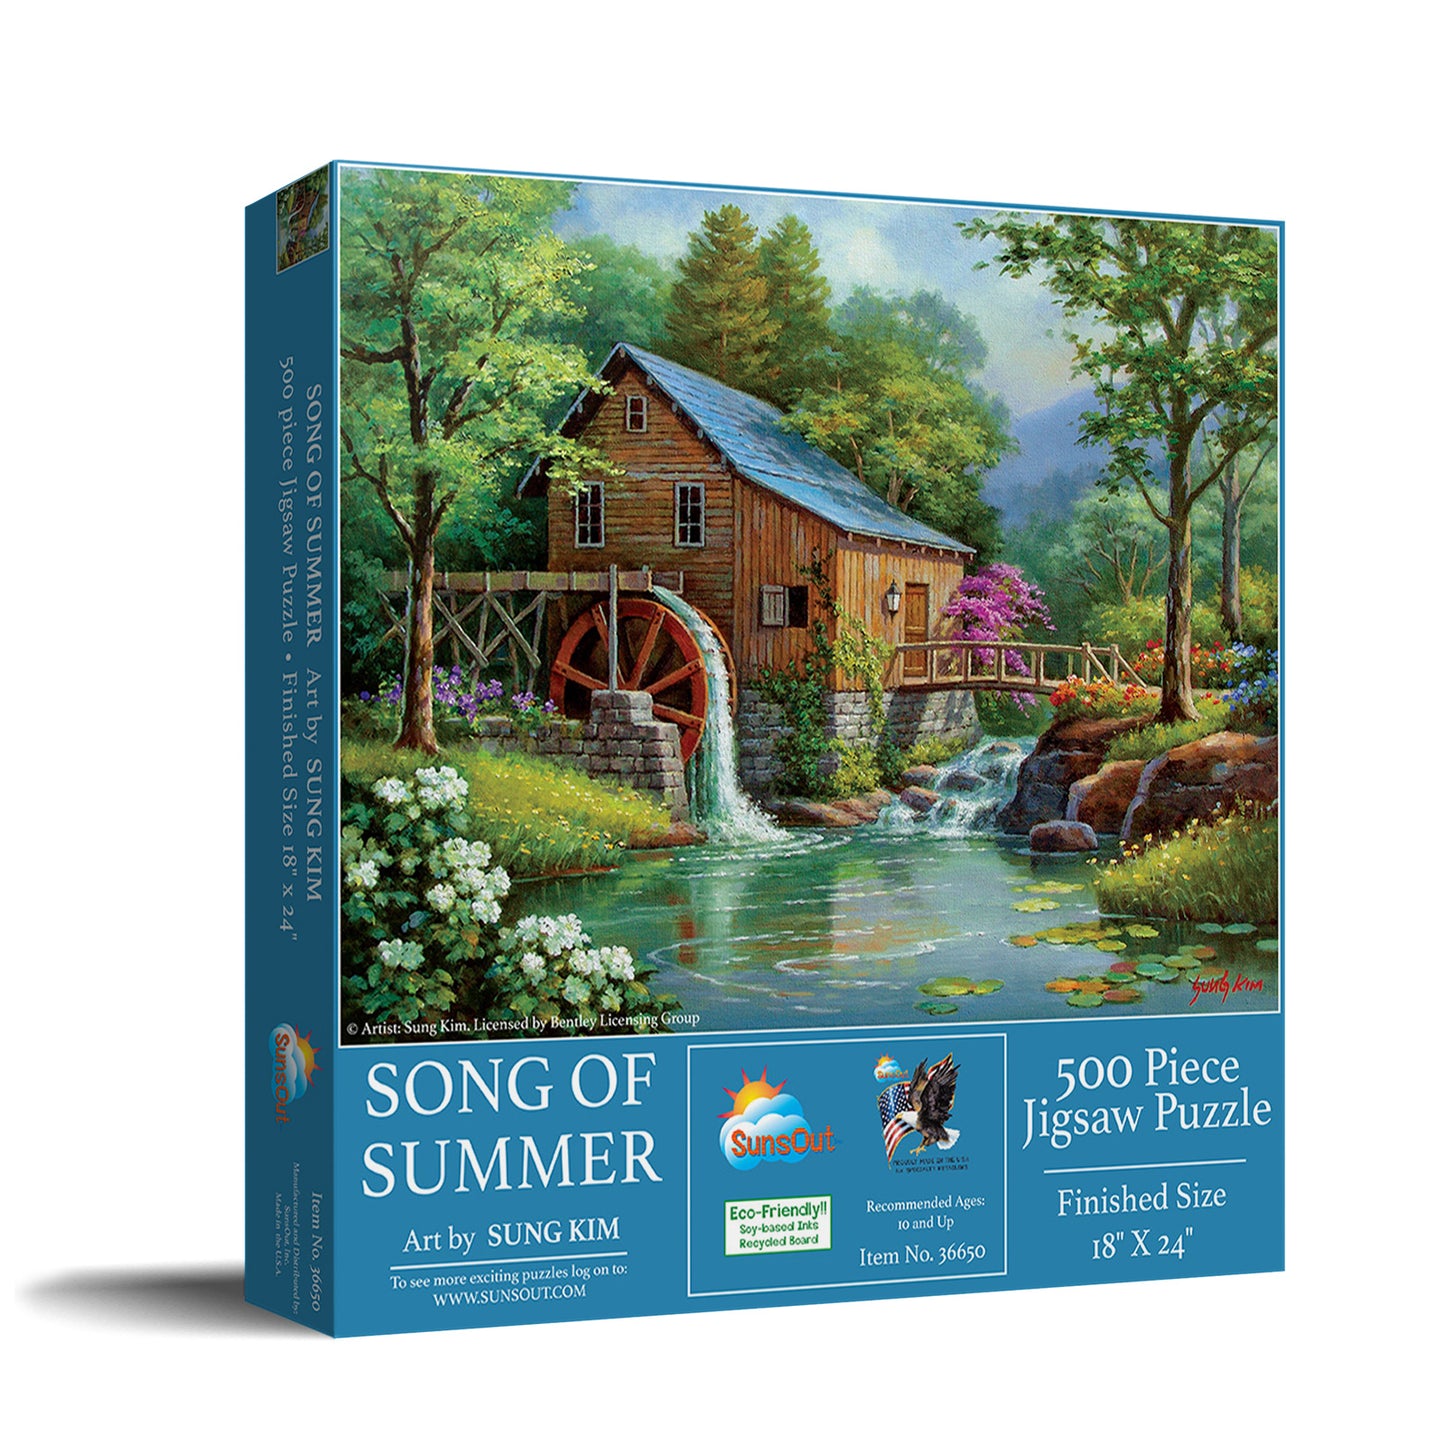 Song of Summer - 500 Piece Jigsaw Puzzle